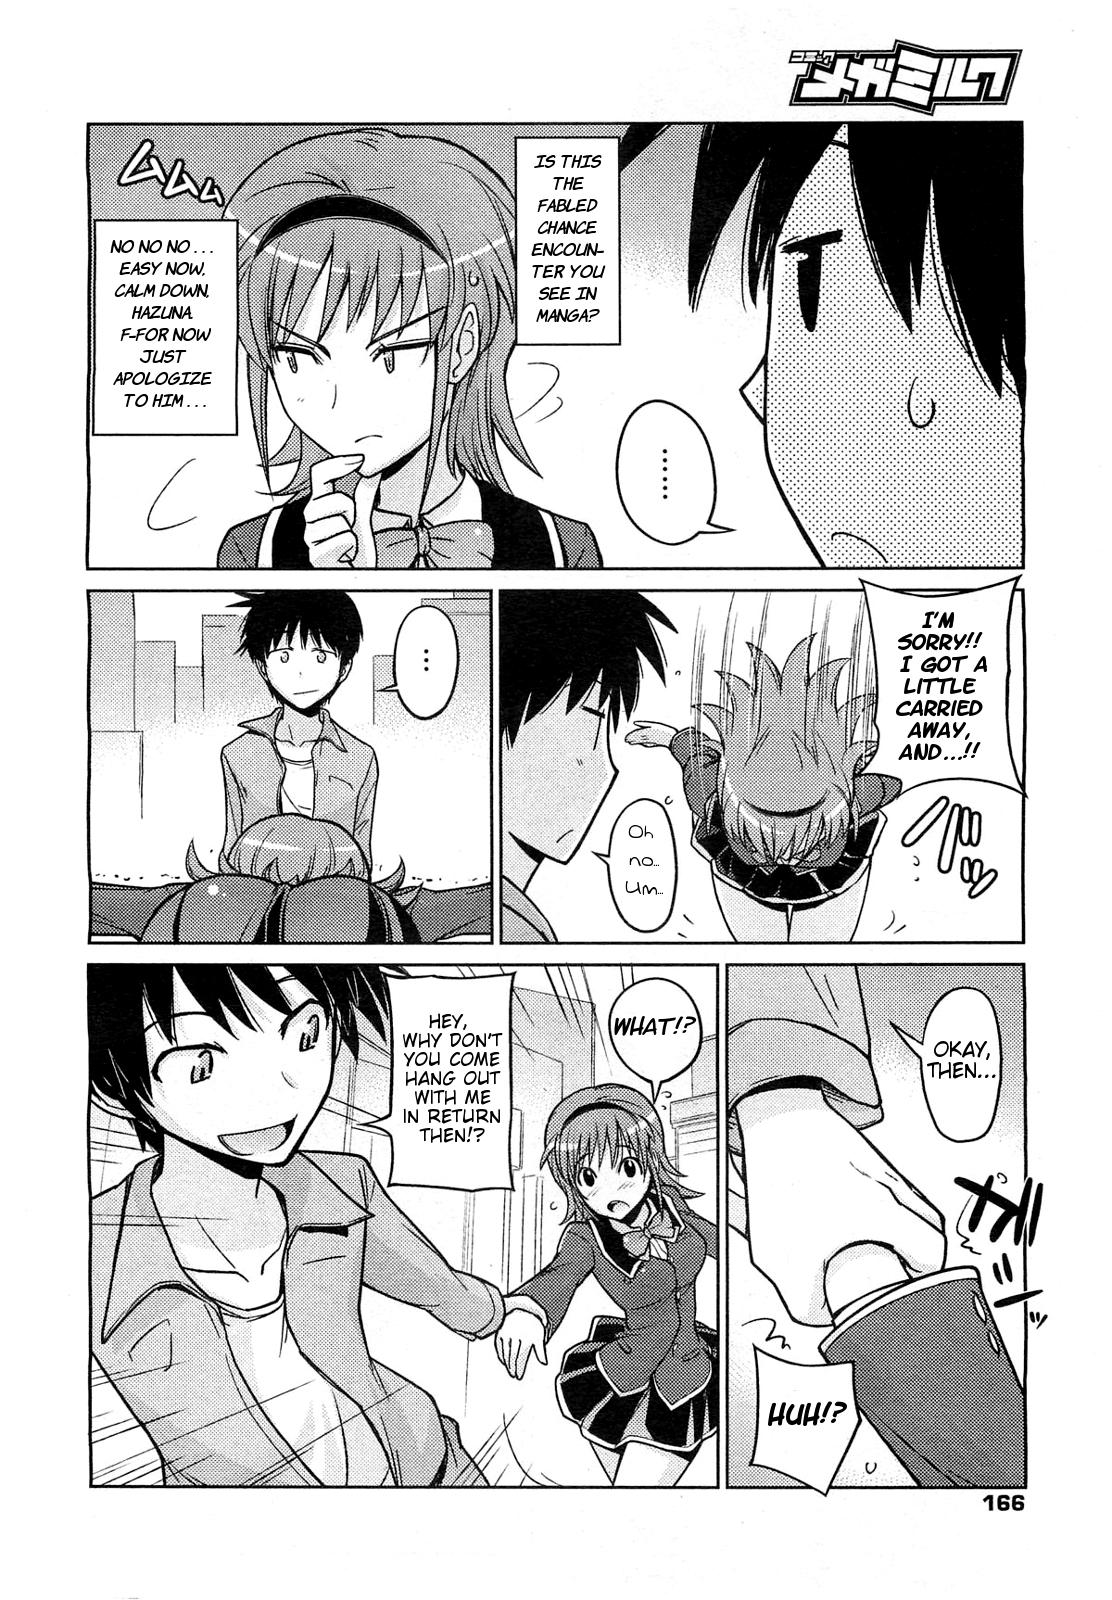 Relax [Umiushi] Let's Play With a High School (?) Girl!! [English] =TV+L4K= Sister - Page 4